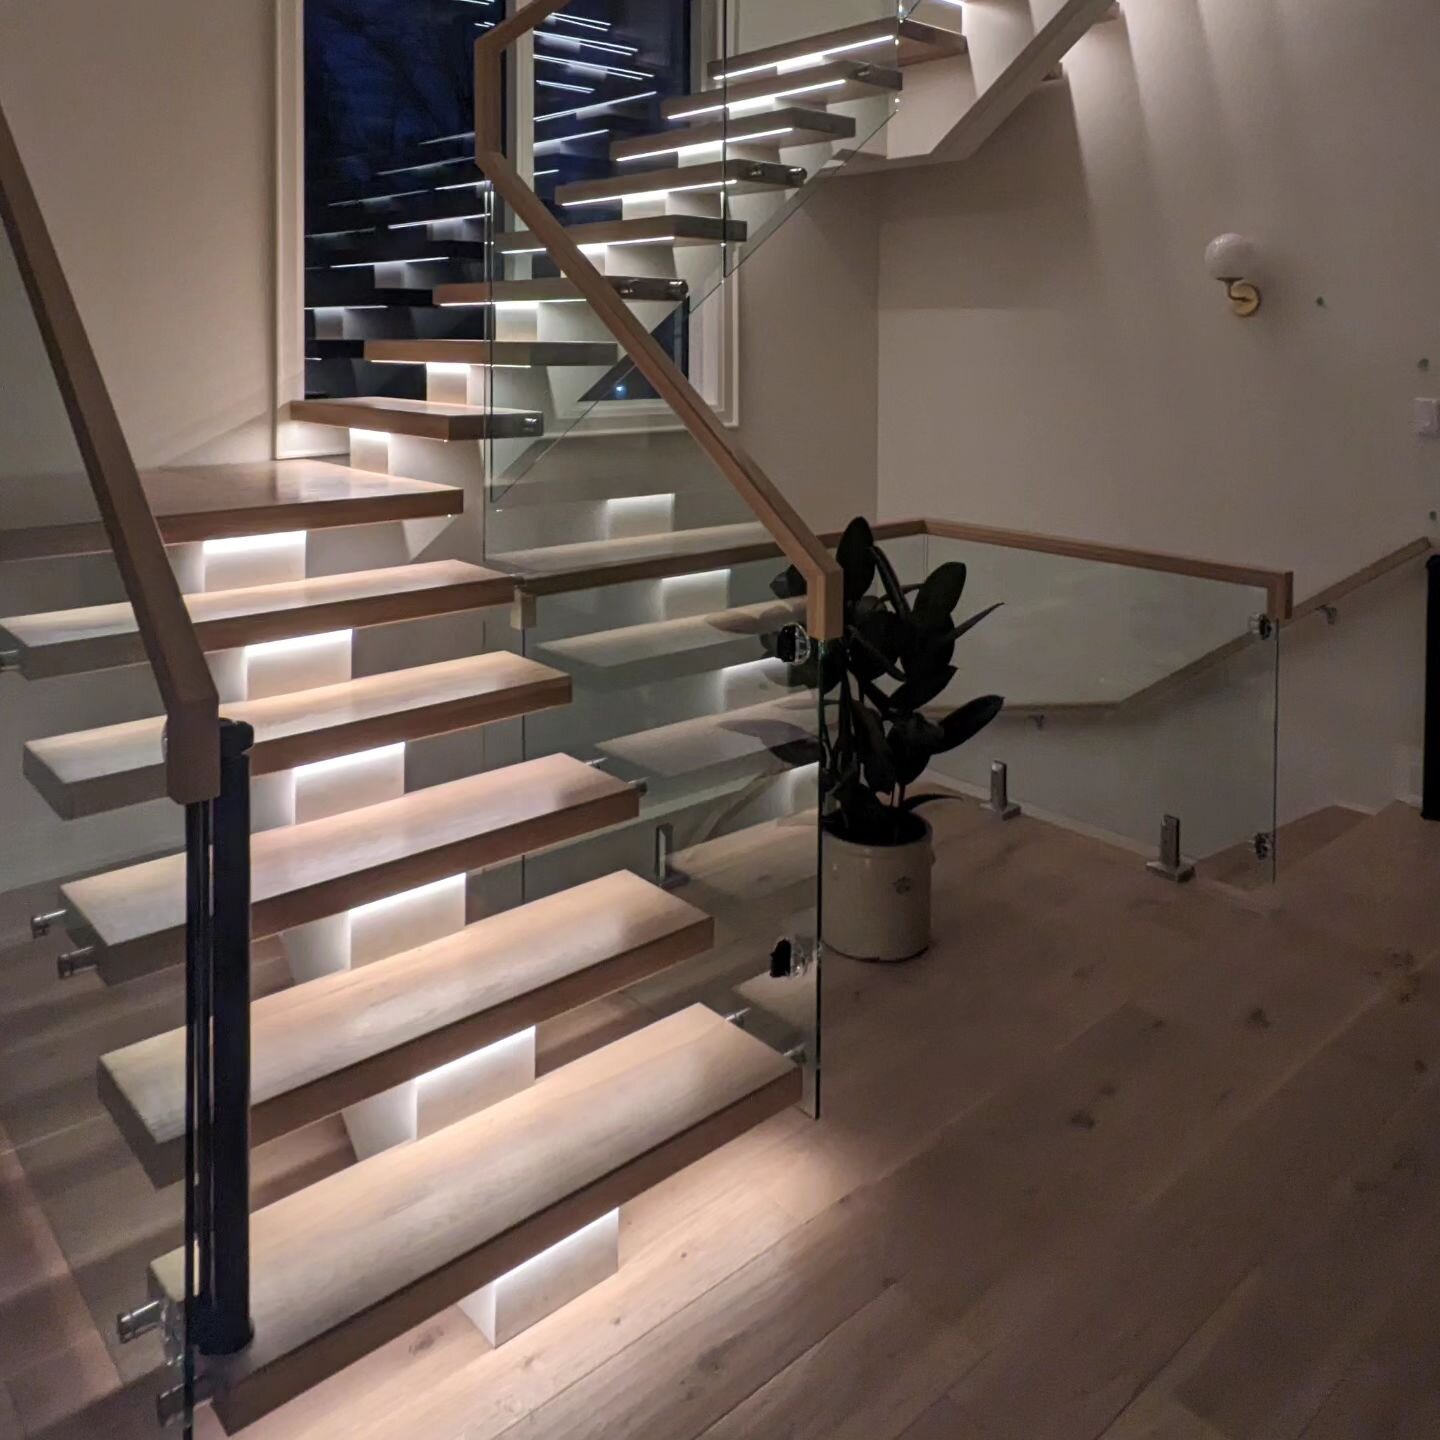 Feature stair with floating hardwood treads, glass rail and lighting. #stair #featurestair #hardwood #glass #glassrail #modern #contemporary #architecture #interior #design